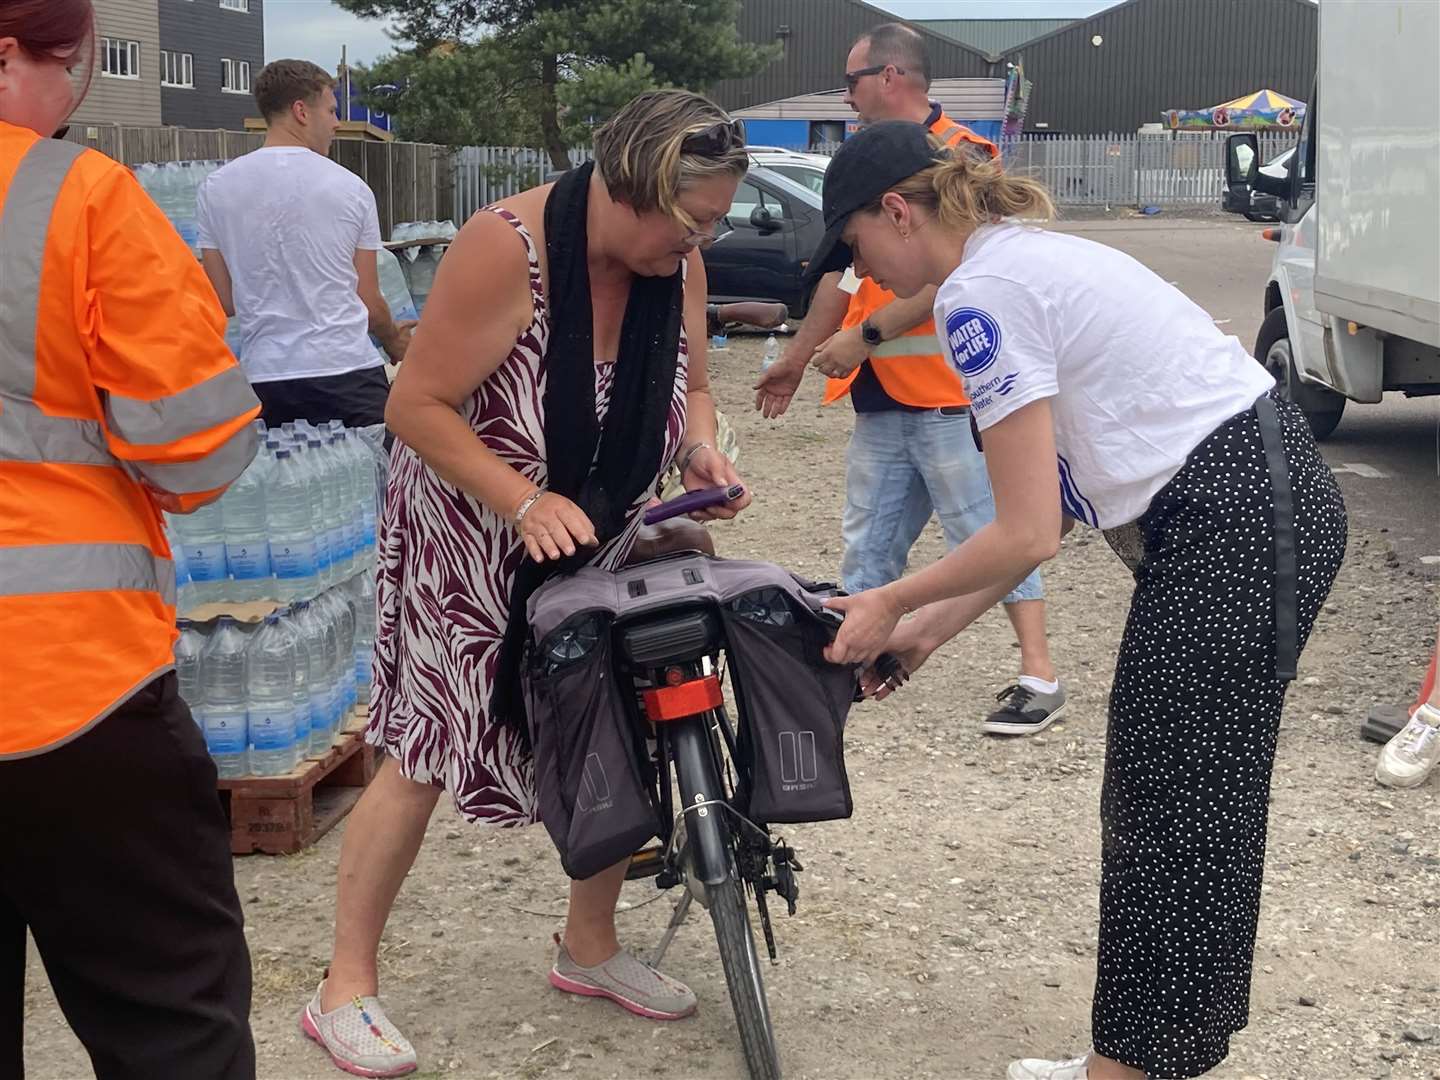 One woman was collecting water in Leysdown on a bike